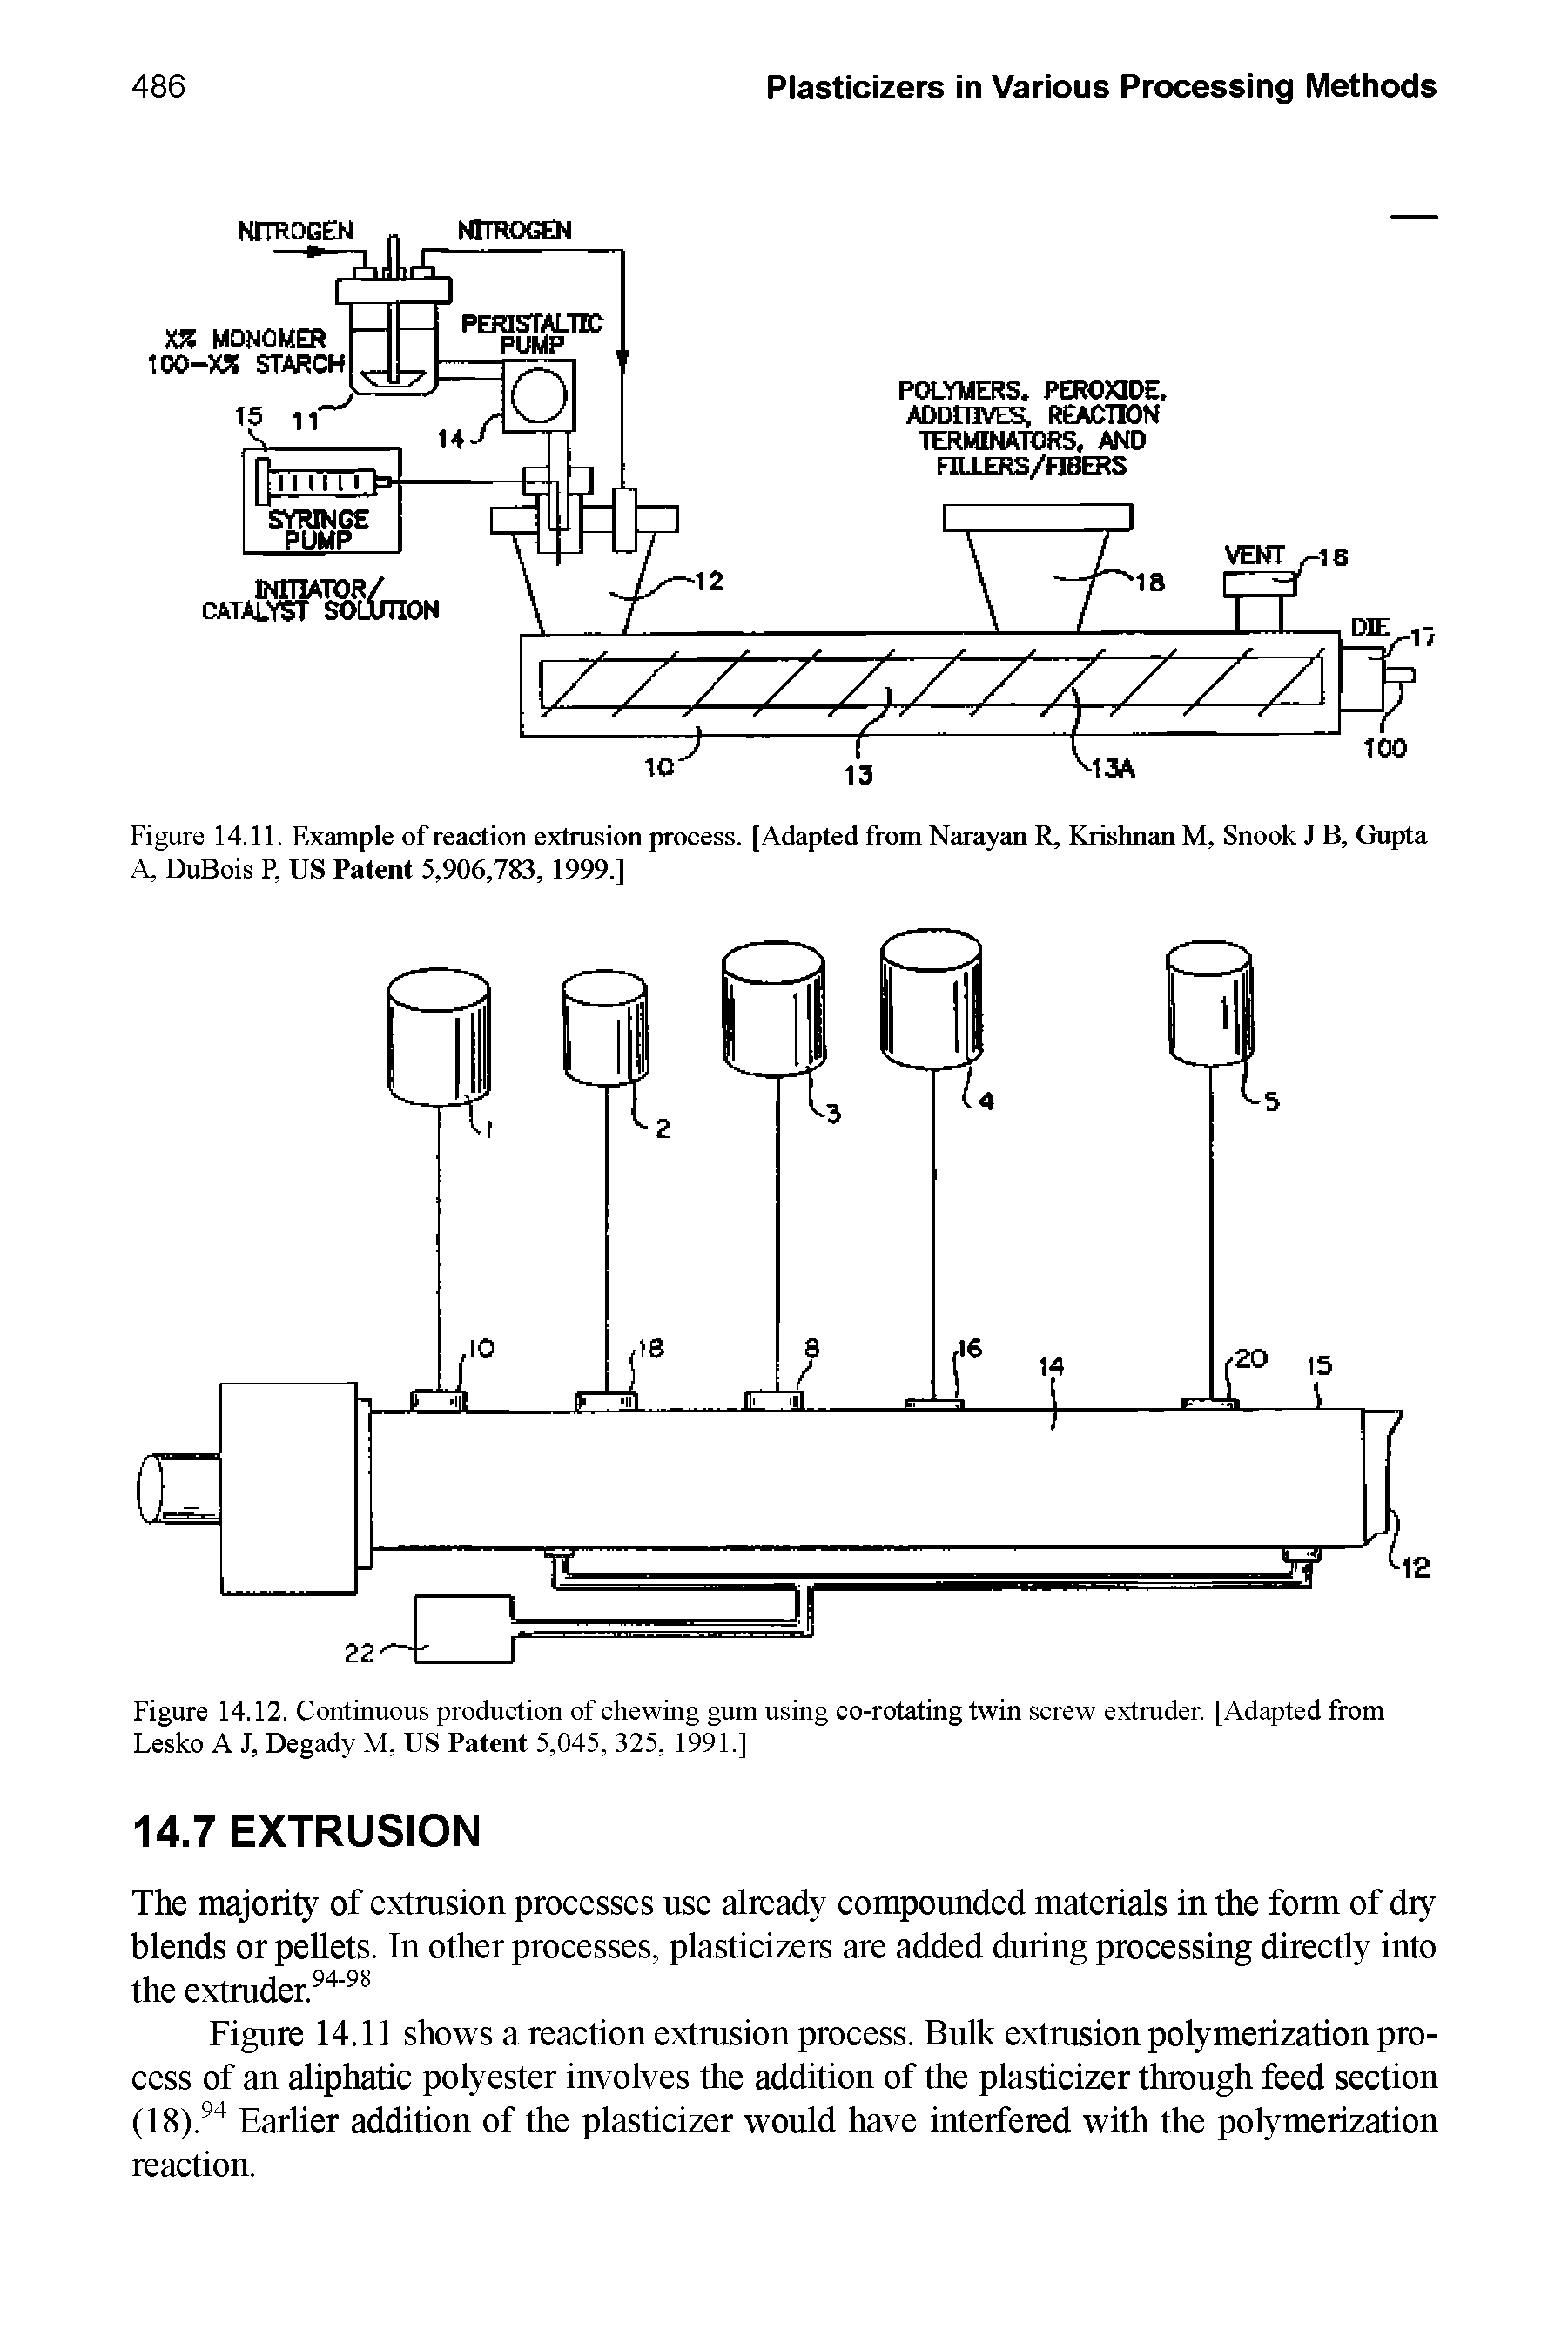 Figure 14.11. Example of reaction extrusion process. [Adapted from Narayan R, Krishnan M, Snook J B, Gupta A, DuBois P, US Patent 5,906,783, 1999.]...